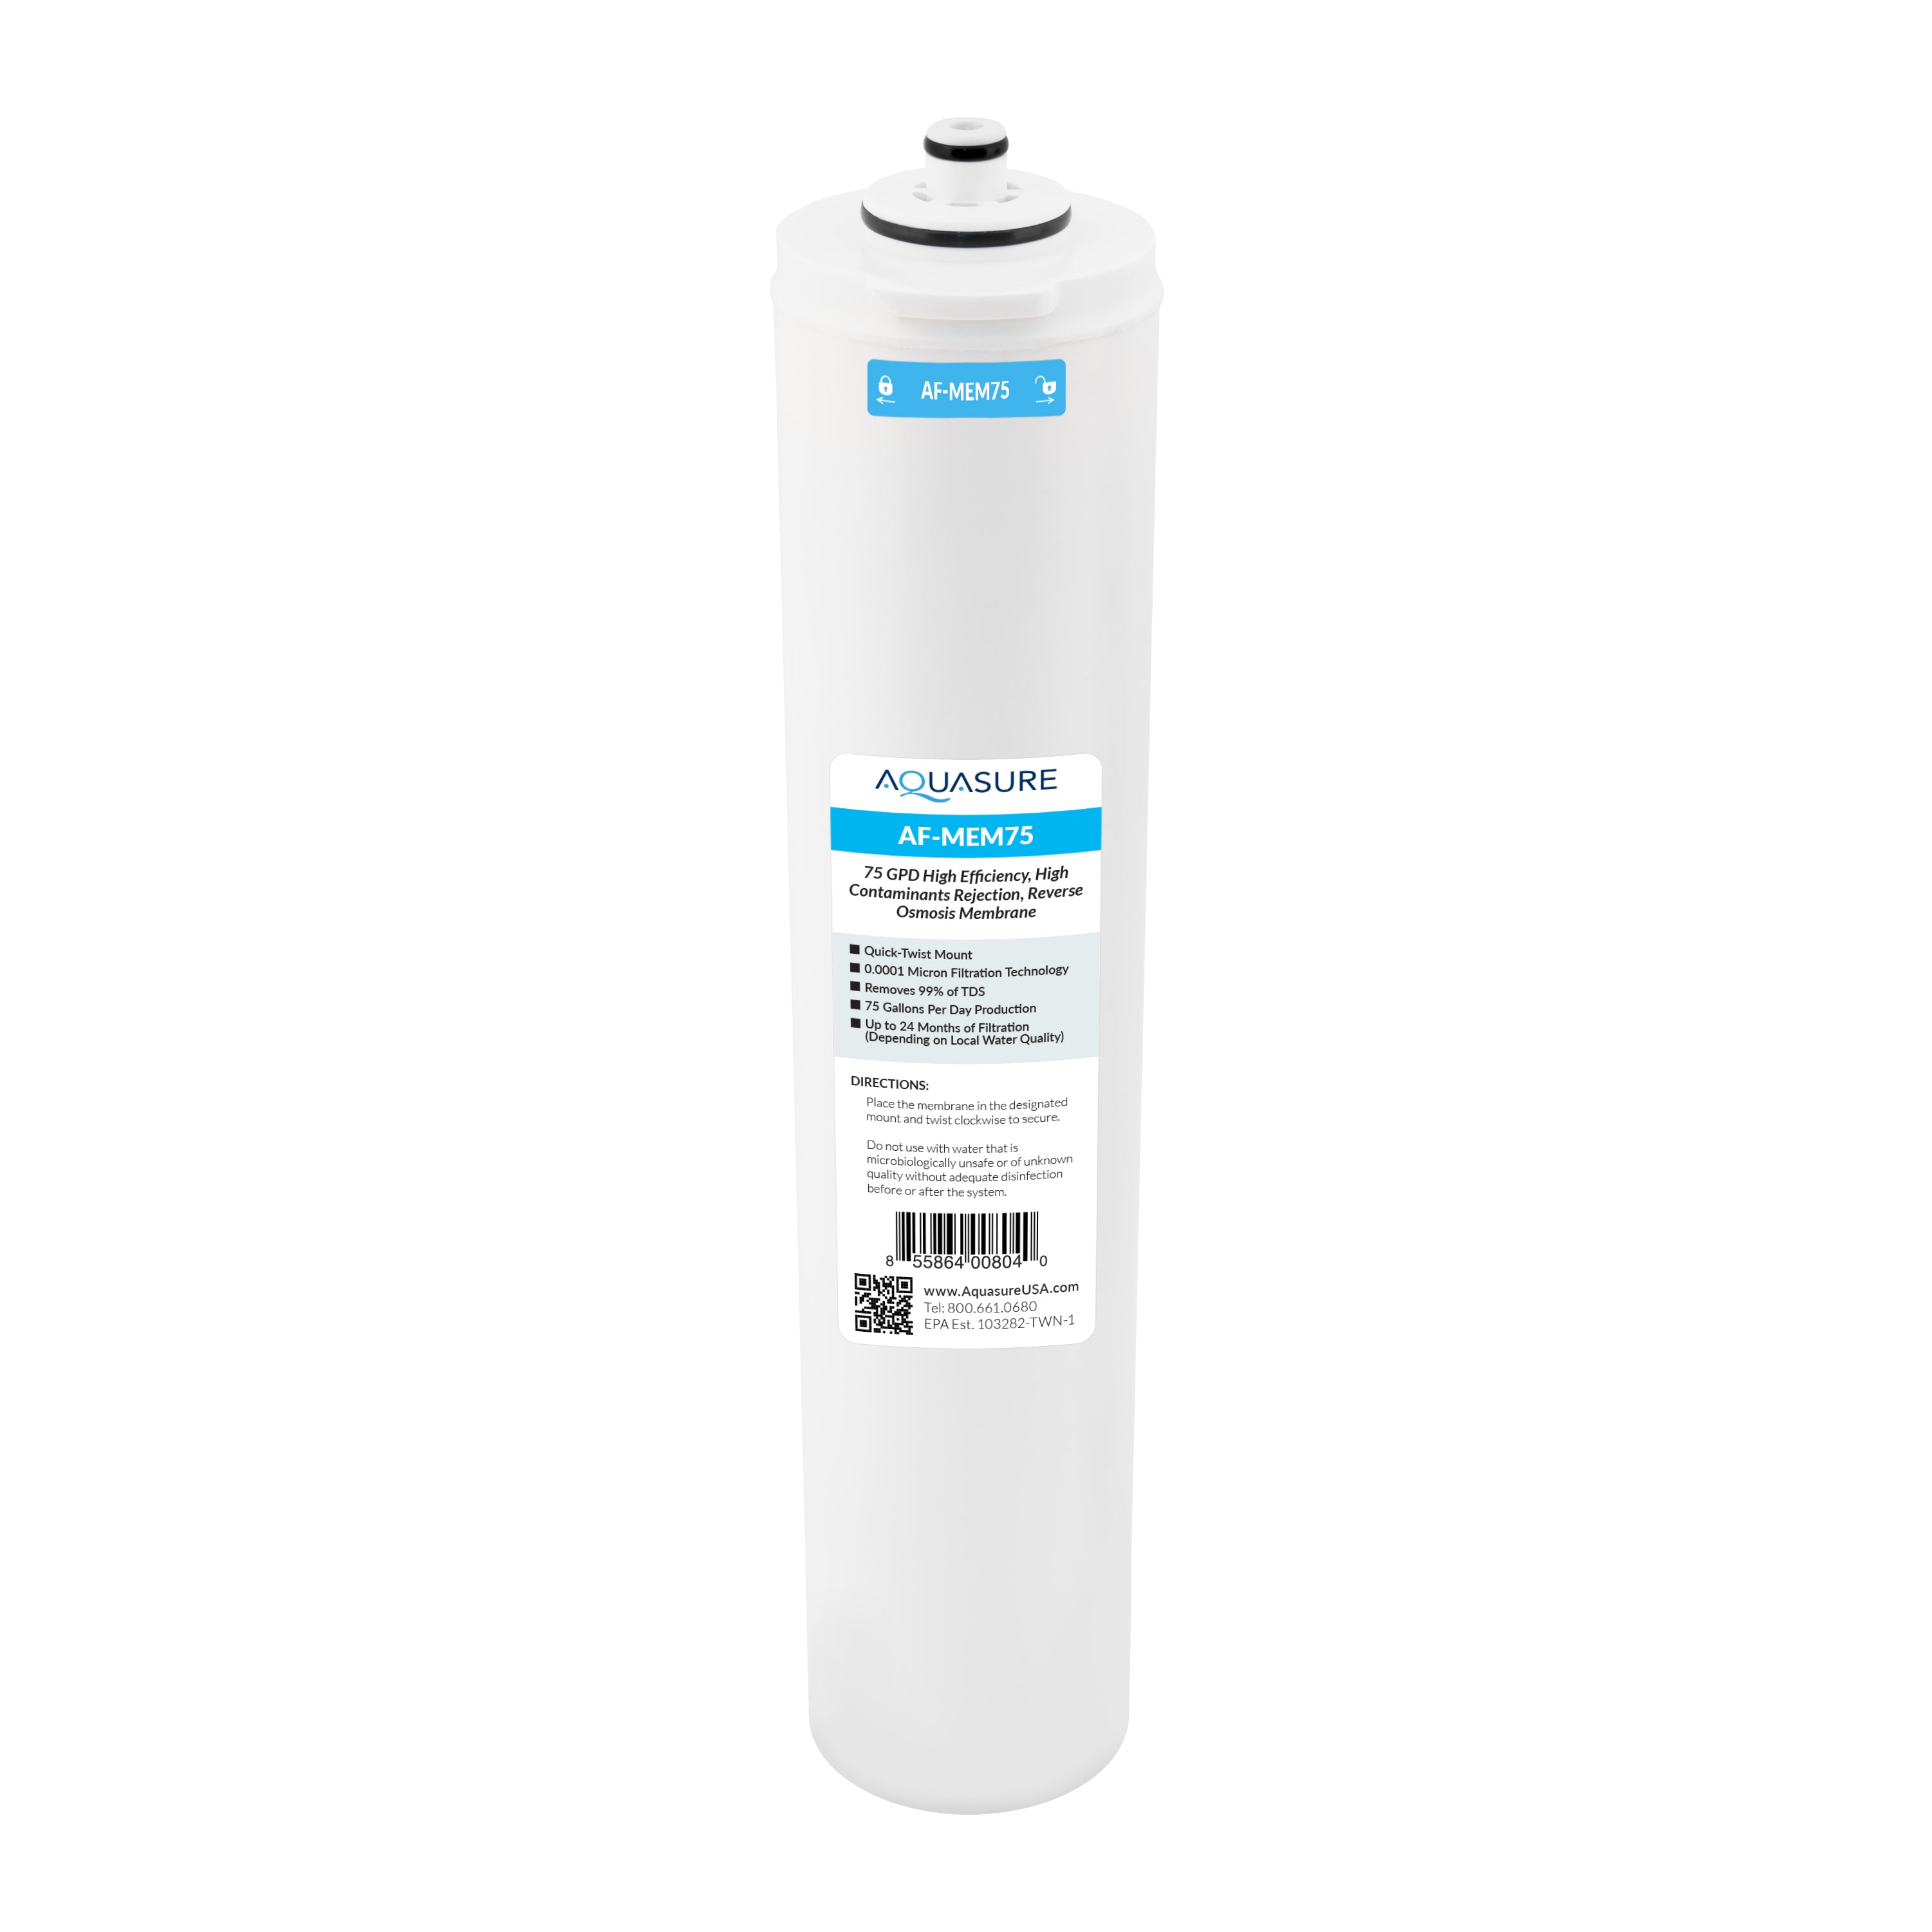 Premier Series | Stage 3 75 GPD Membrane RO Water Filter Replacement Cartridge for AS-PR75